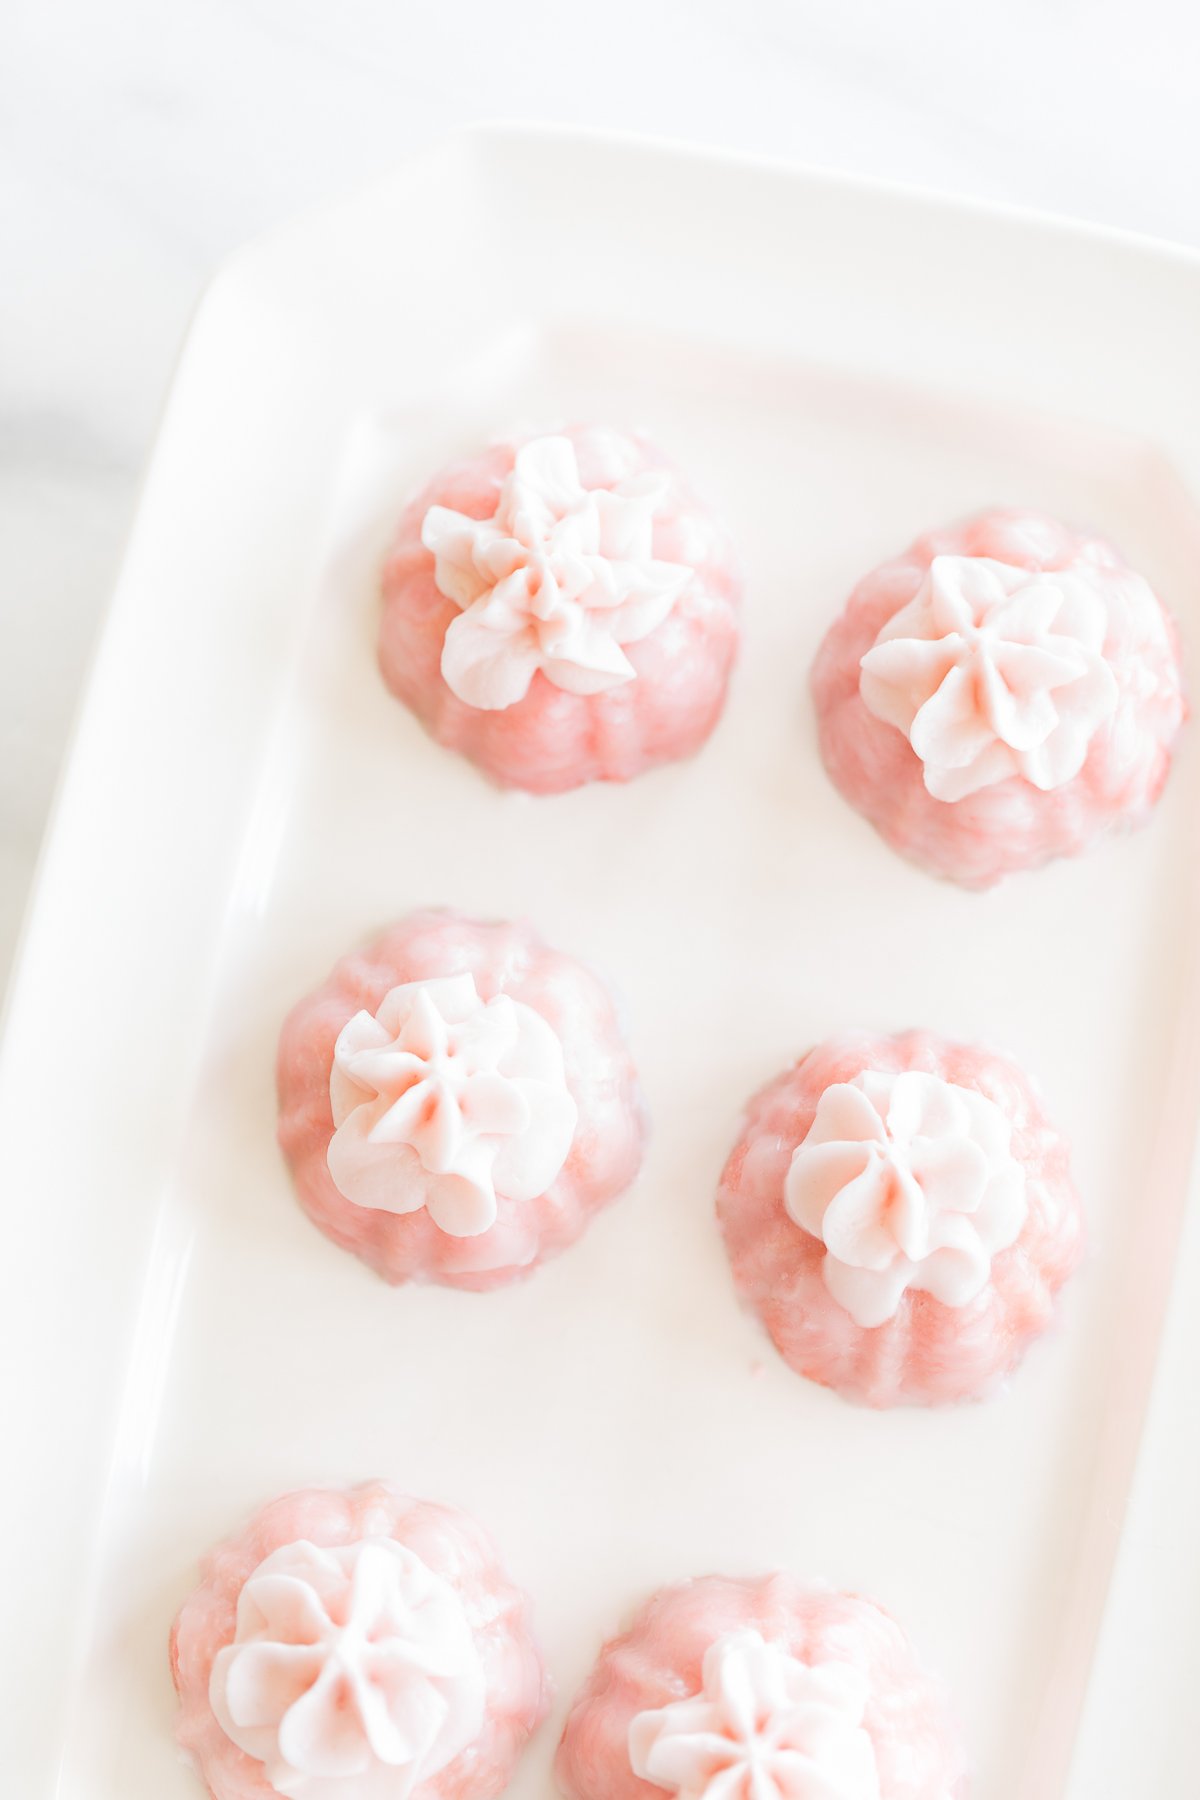 White tray with five pink champagne cupcakes, each topped with a white flower, arranged neatly on a marble surface.